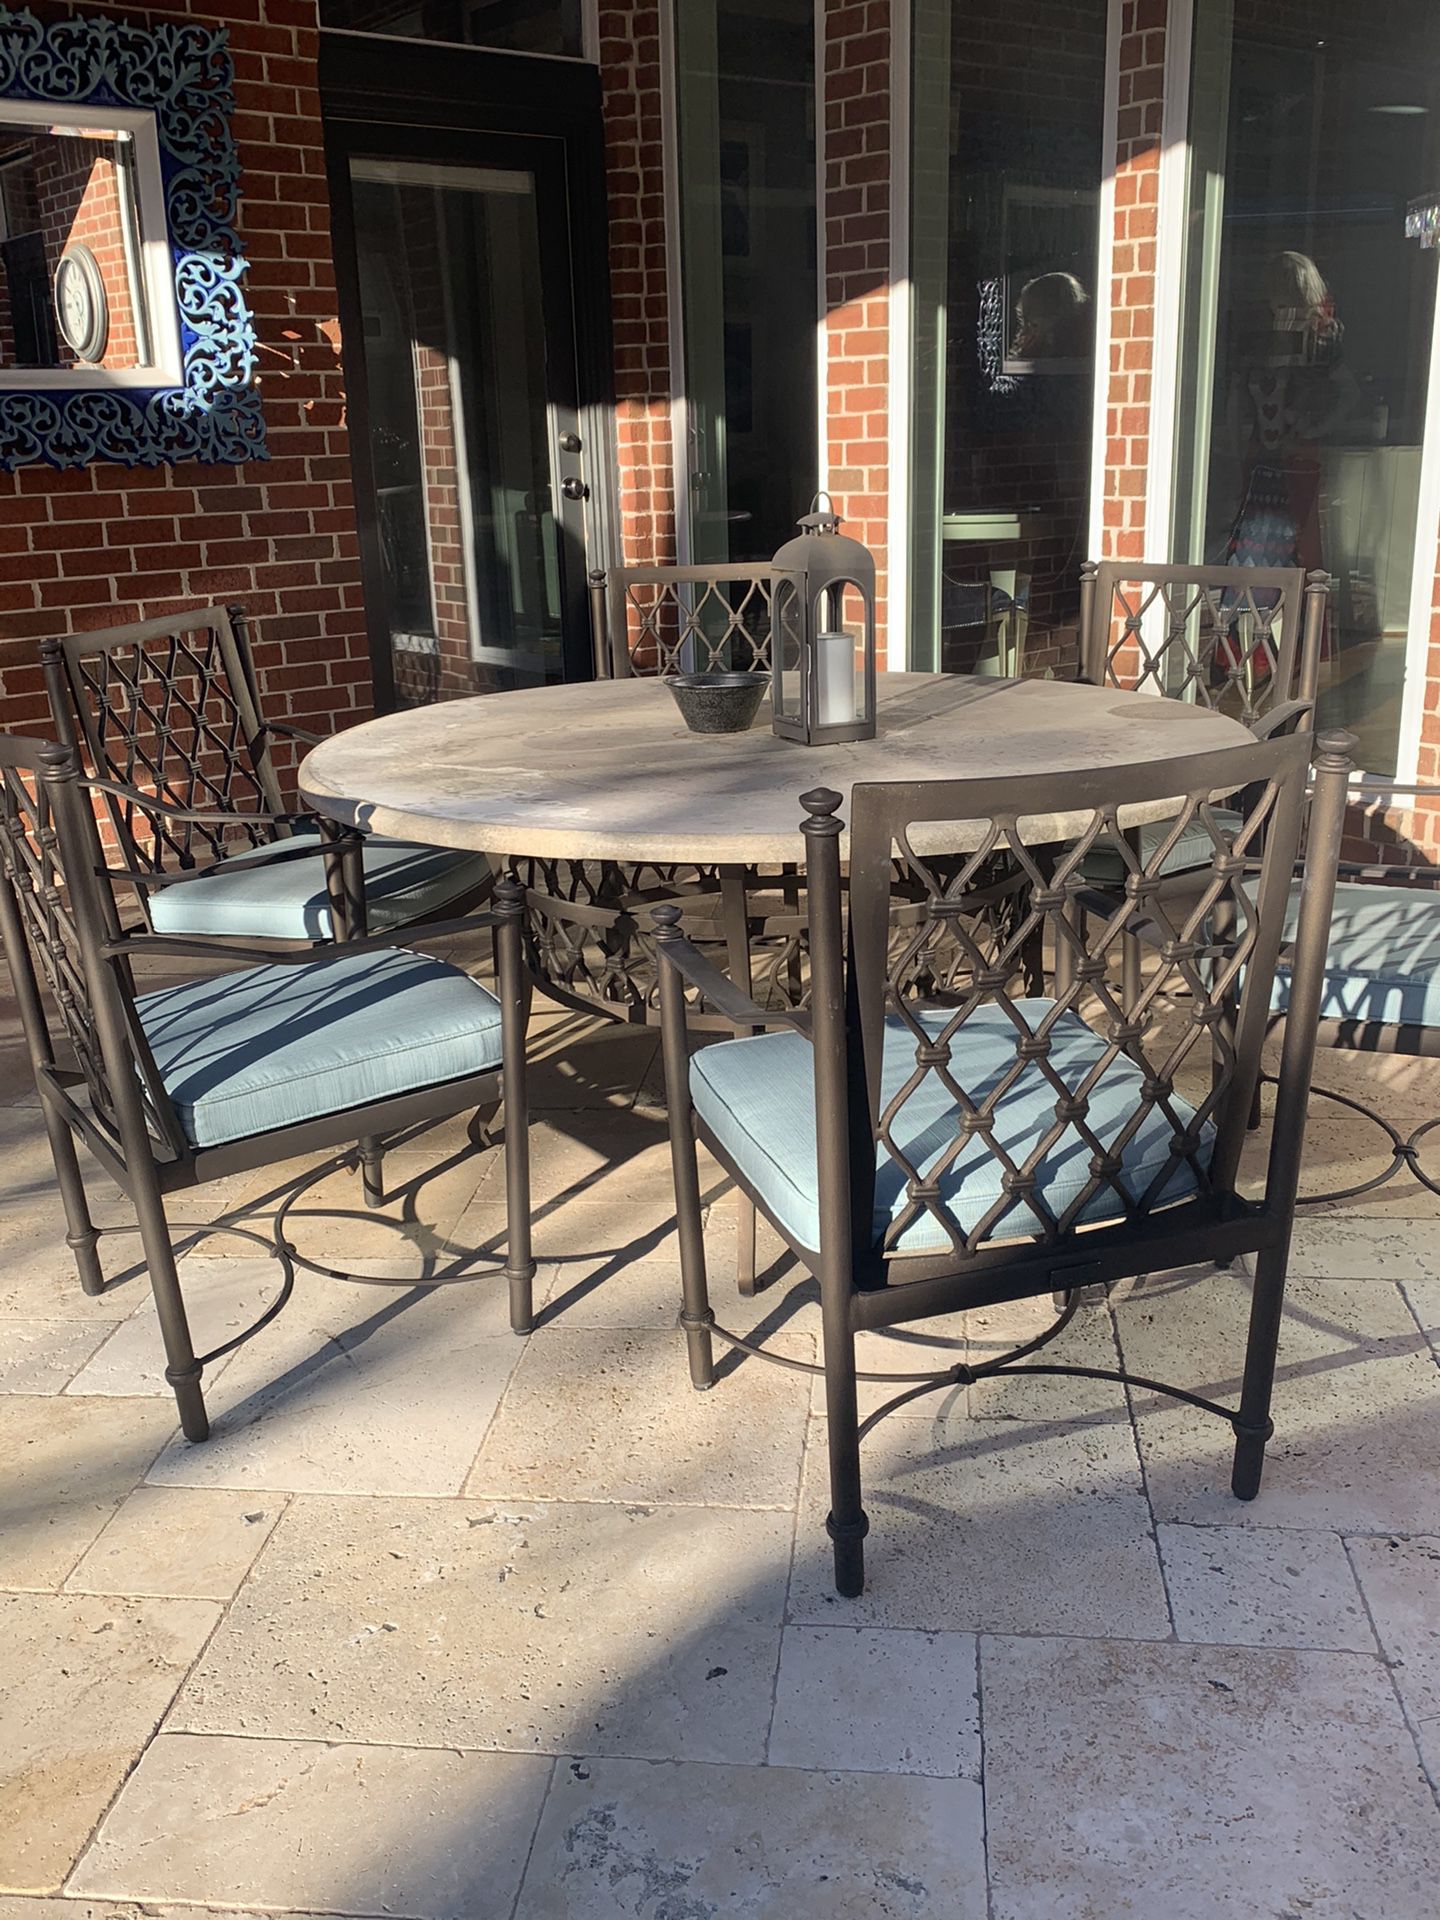 Excellent quality patio table and chairs